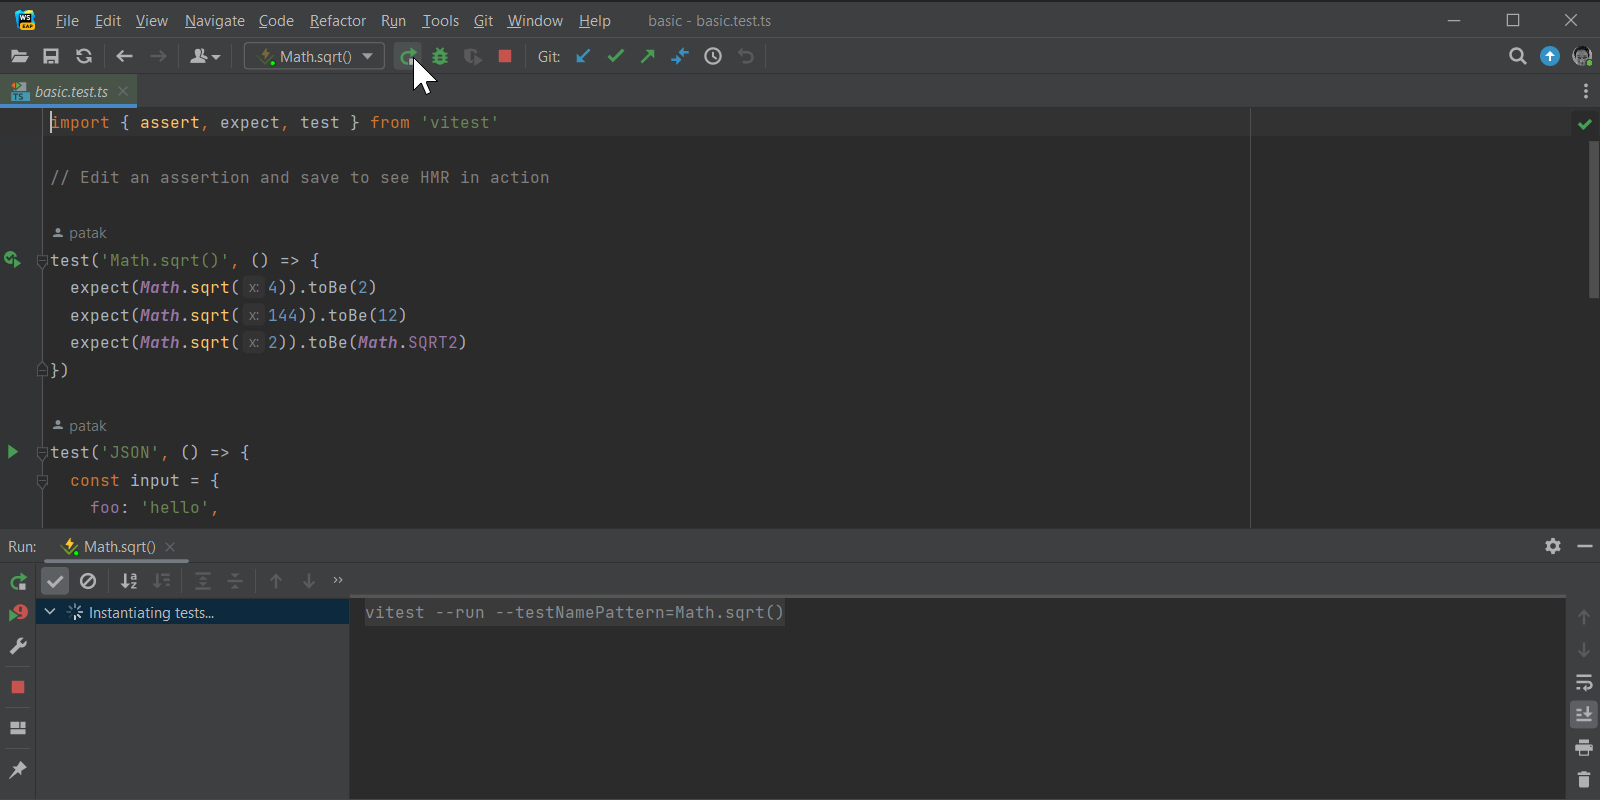 Running Vitest tests from WebStorm using the various run options